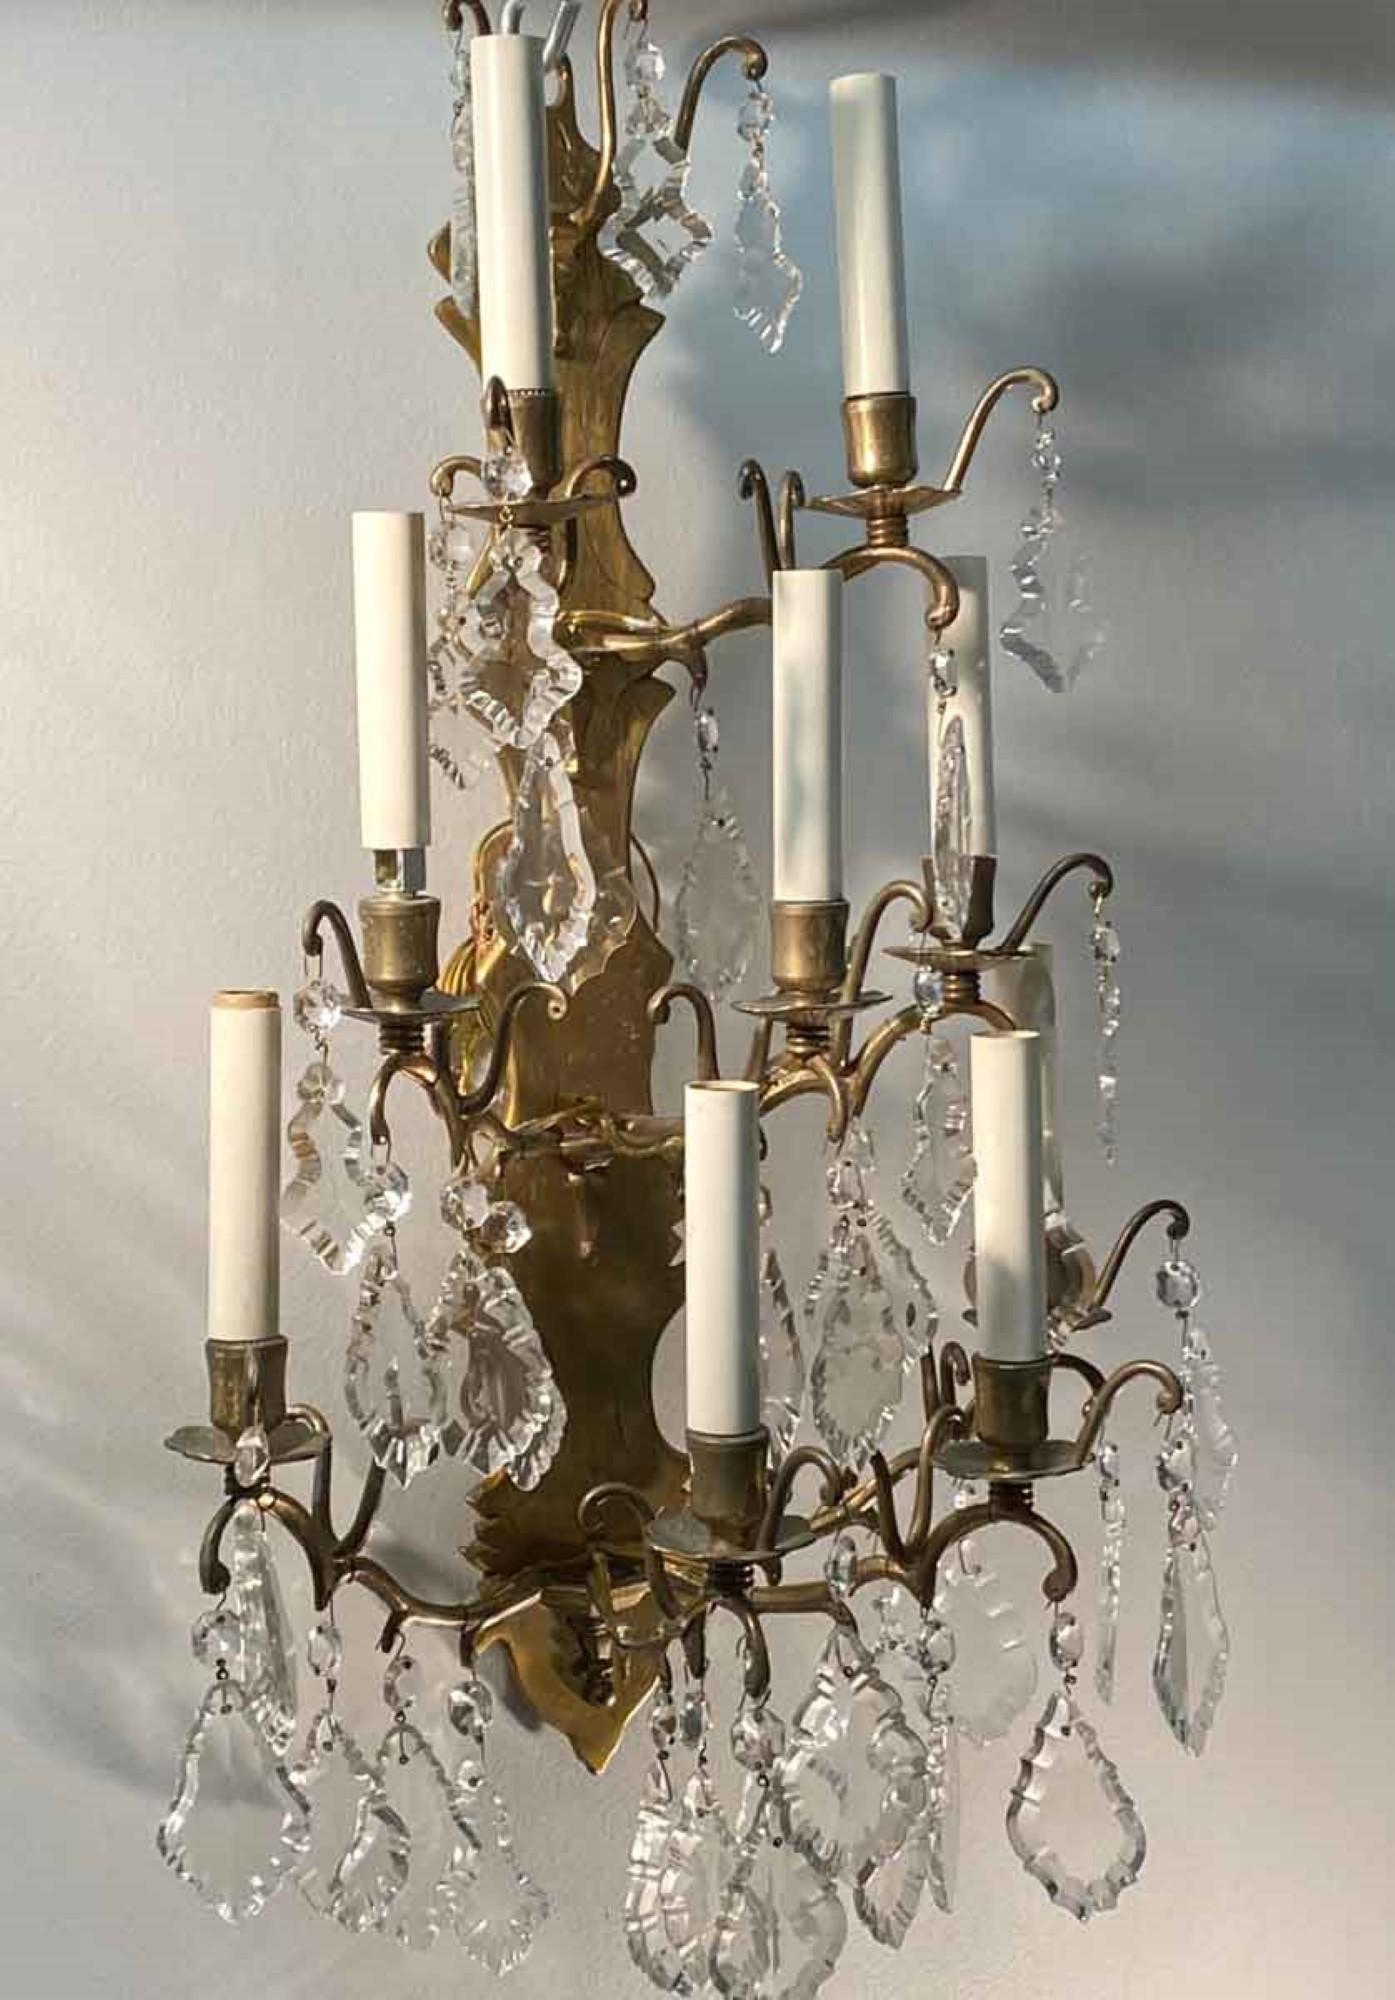 Mid-20th Century NY Plaza Hotel French Brass Crystal Sconce 9 Arms Quantity Available